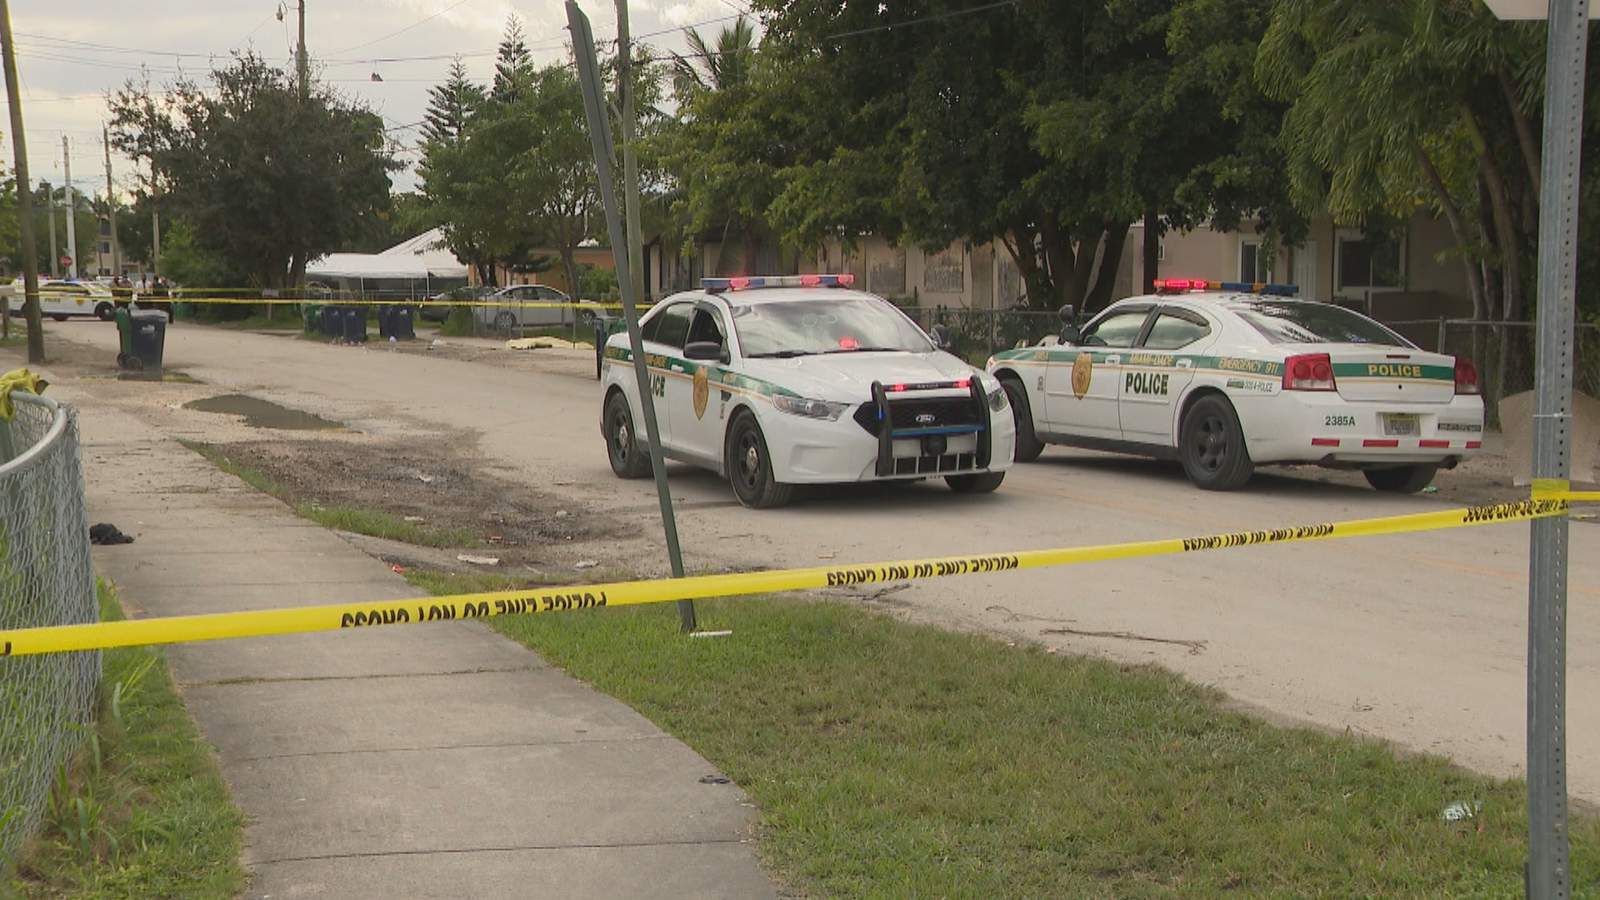 Police in Southwest Miami-Dade investigating fatal drive-by shooting